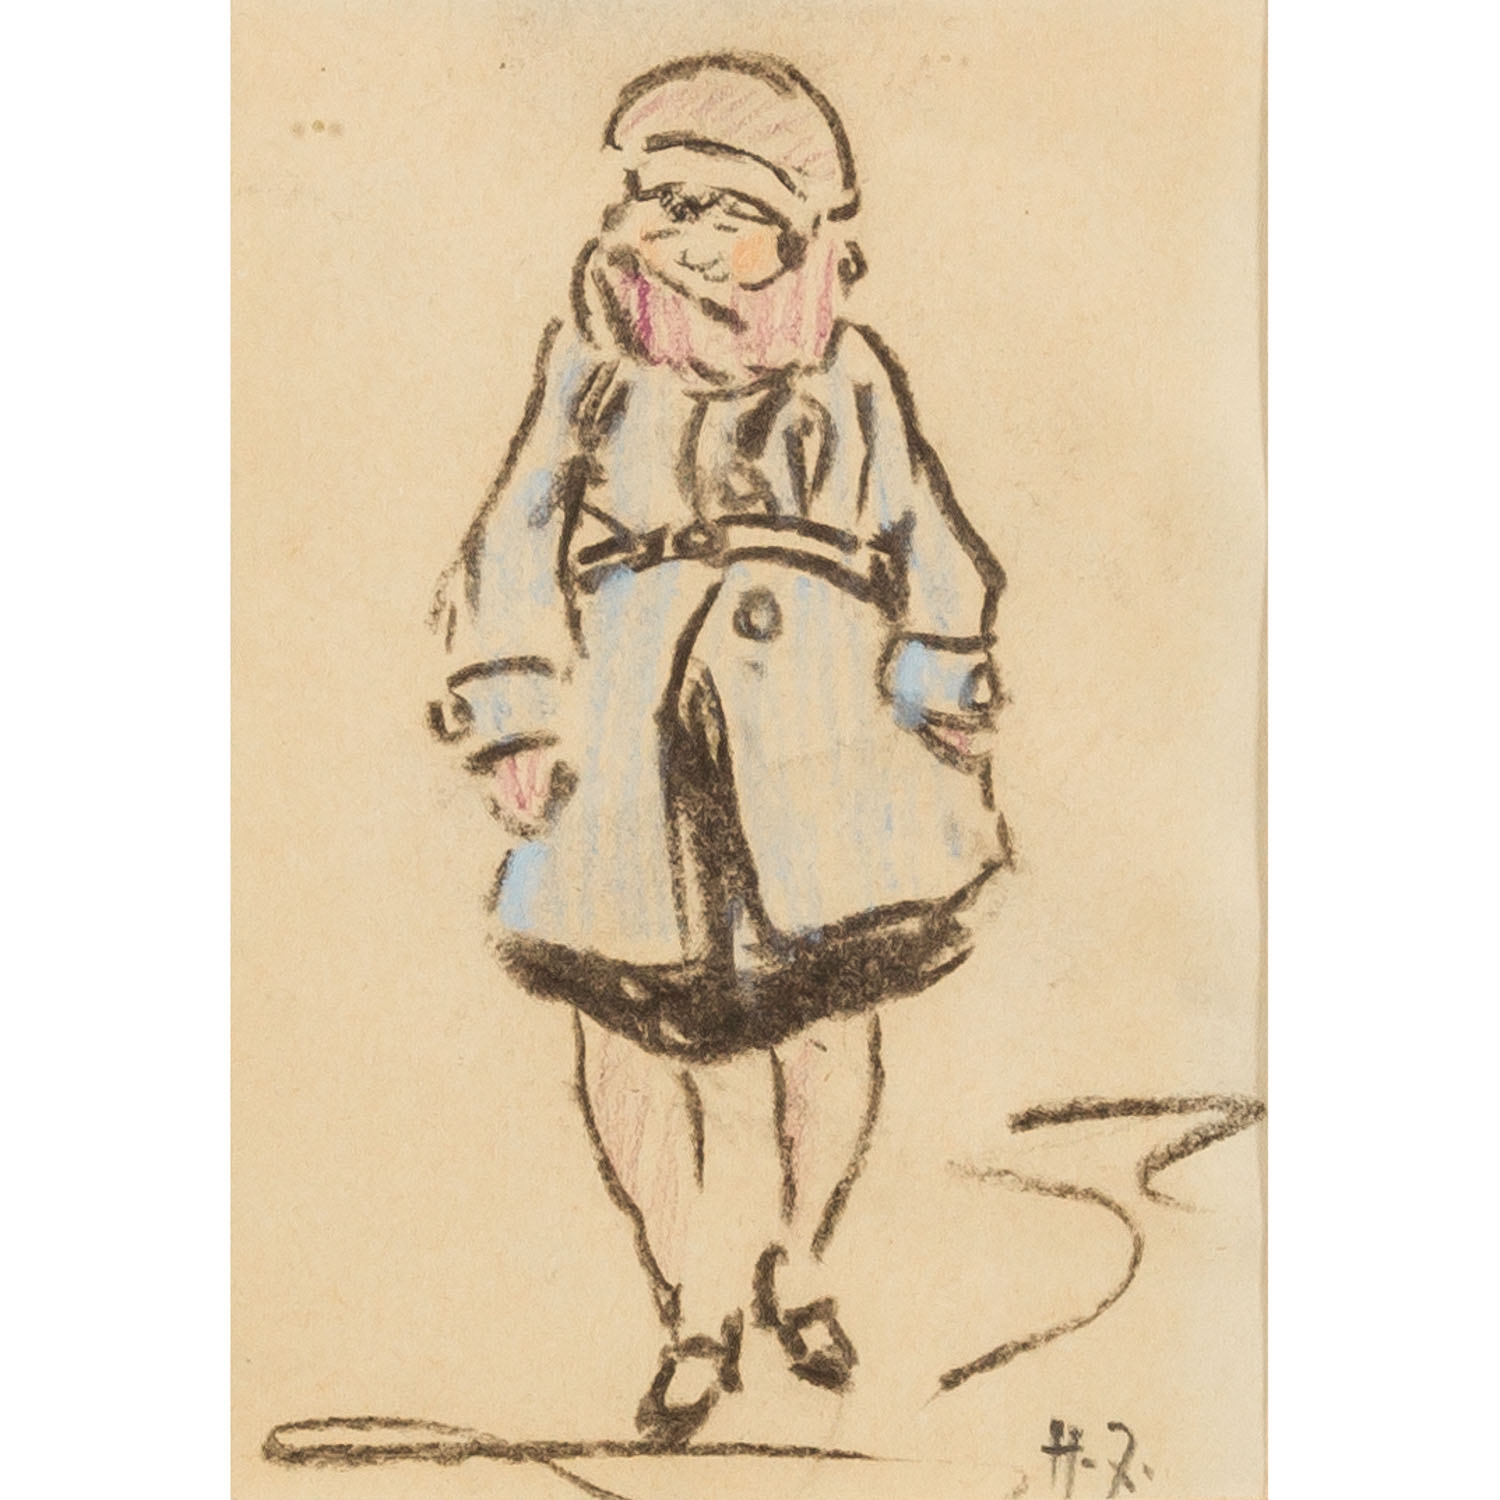 Girl with woollen cap and blue coat by Heinrich Zille